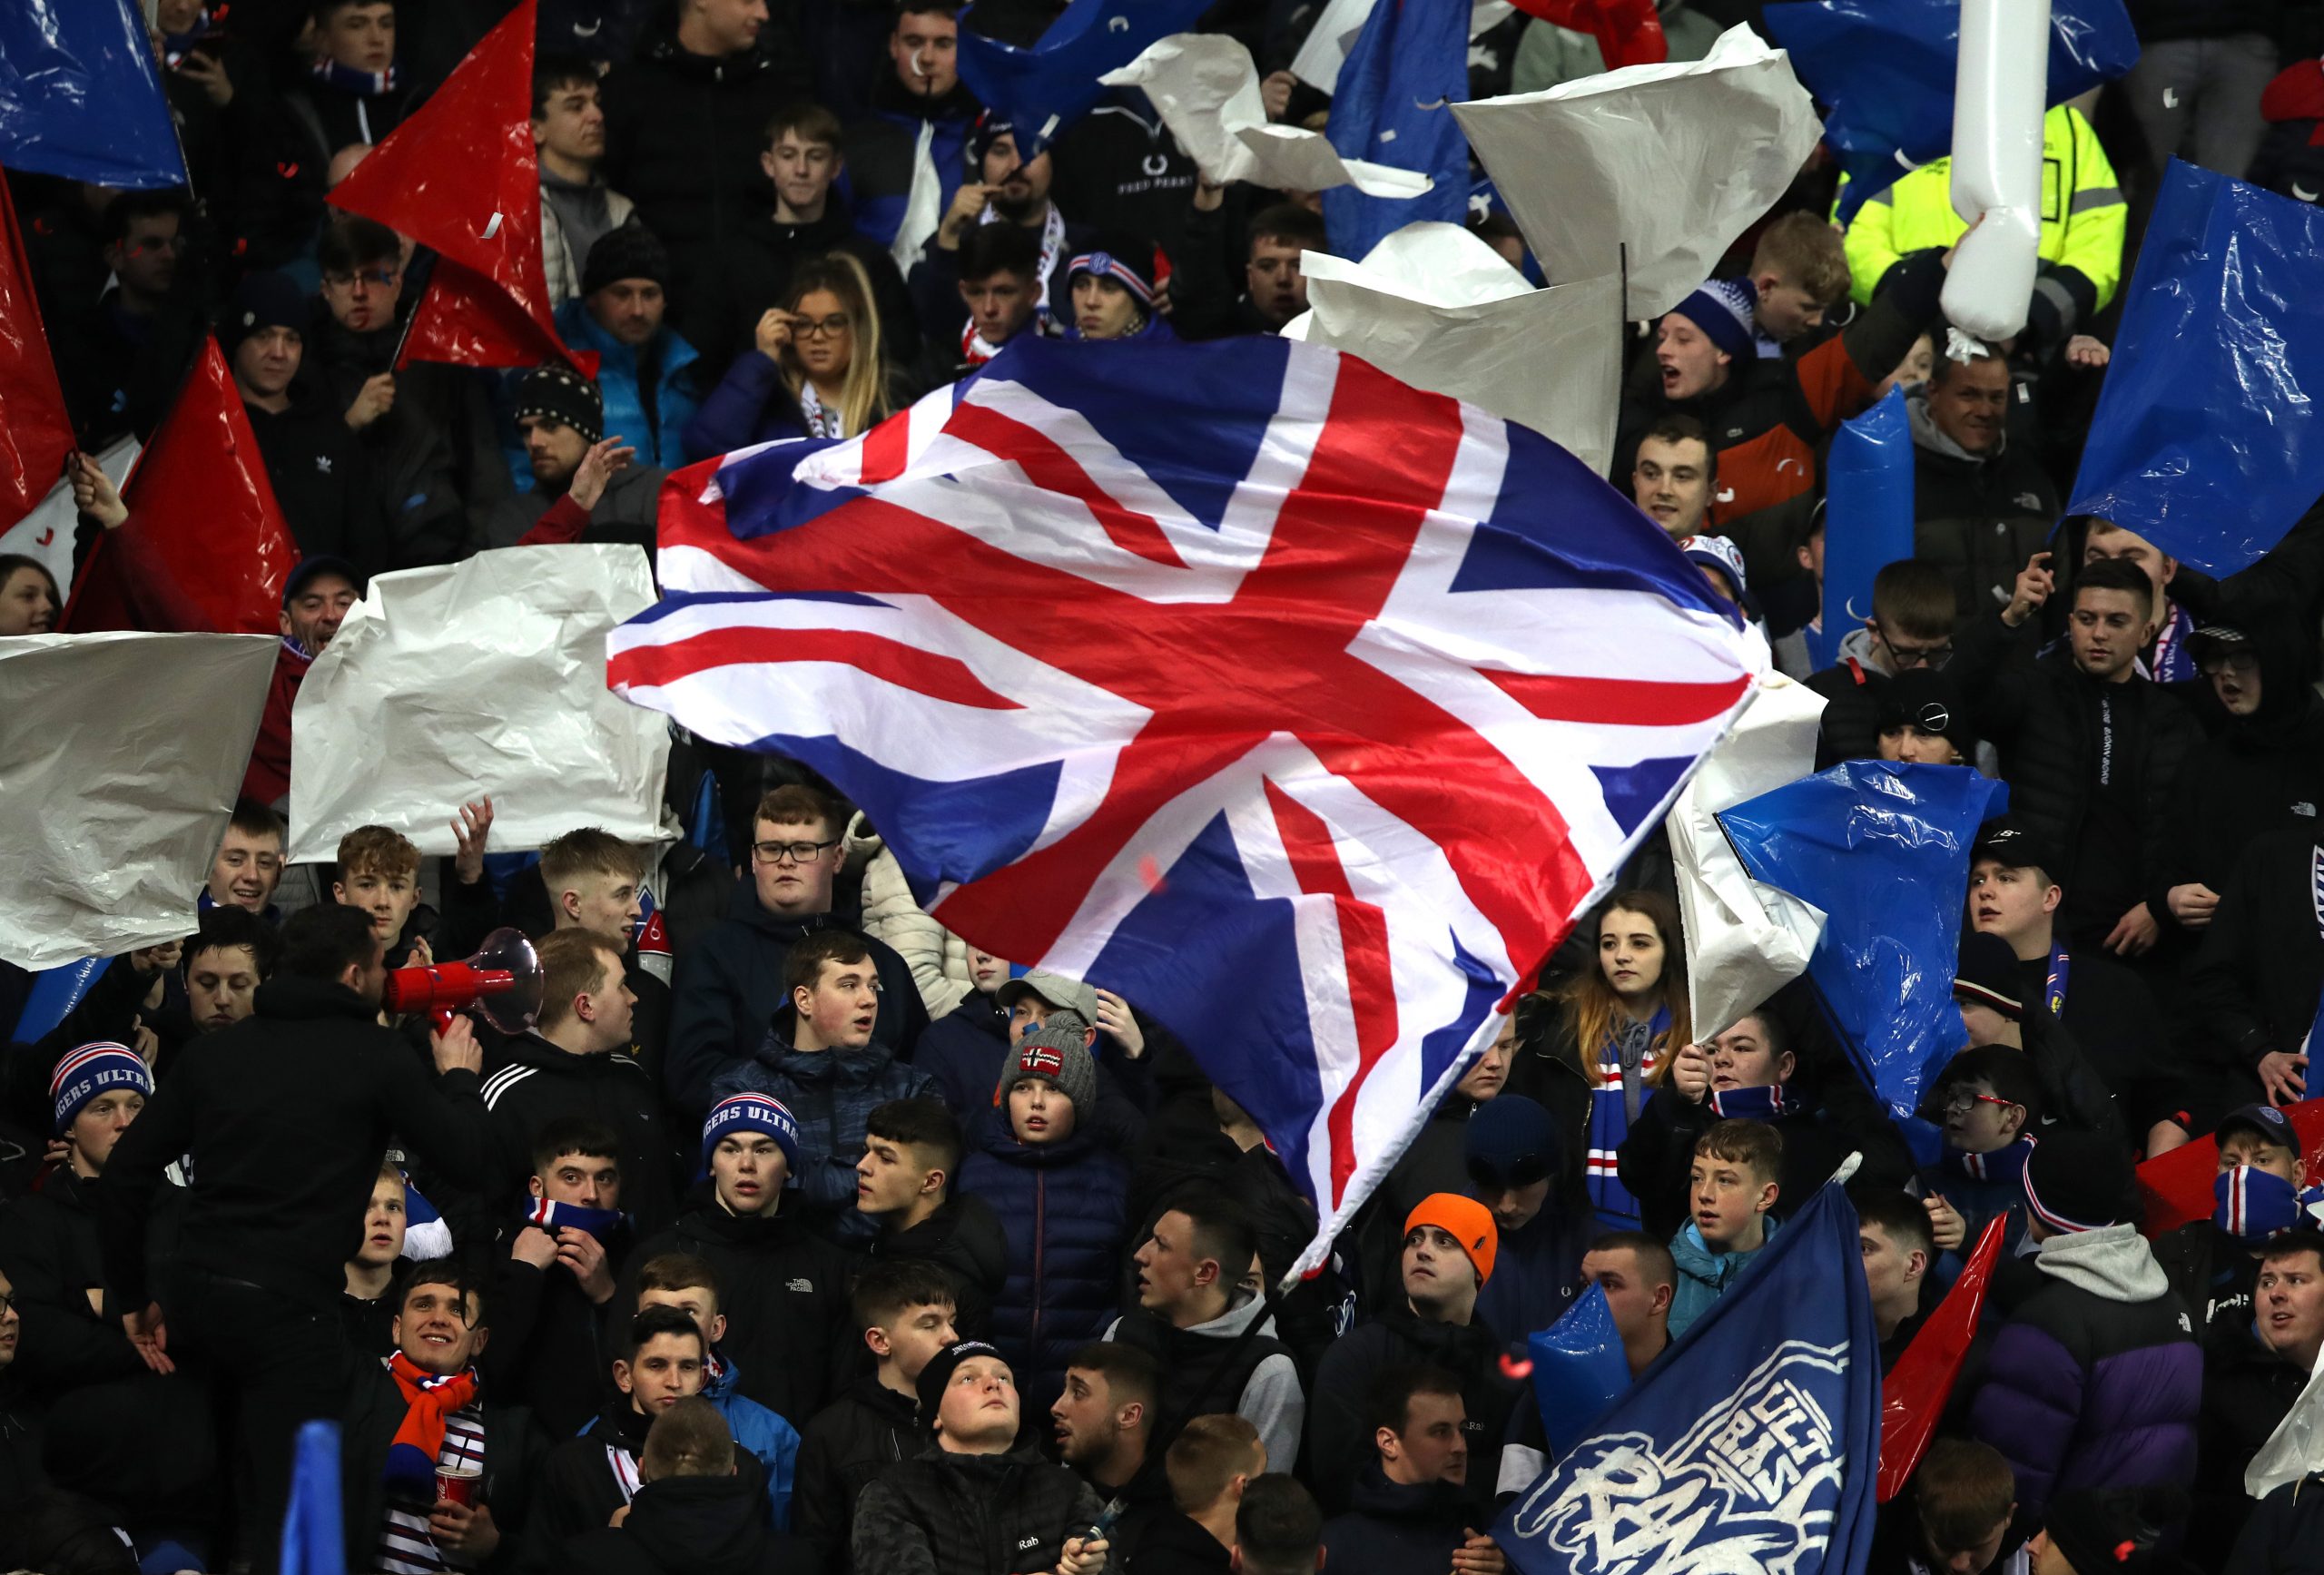 GLASGOW, SCOTLAND - MARCH 12: Rangers FC fans wave a union jack flag prior to the UEFA Europa League round of 16 first leg match between Rangers FC and Bayer 04 Leverkusen at Ibrox Stadium on March 12, 2020 in Glasgow, United Kingdom.